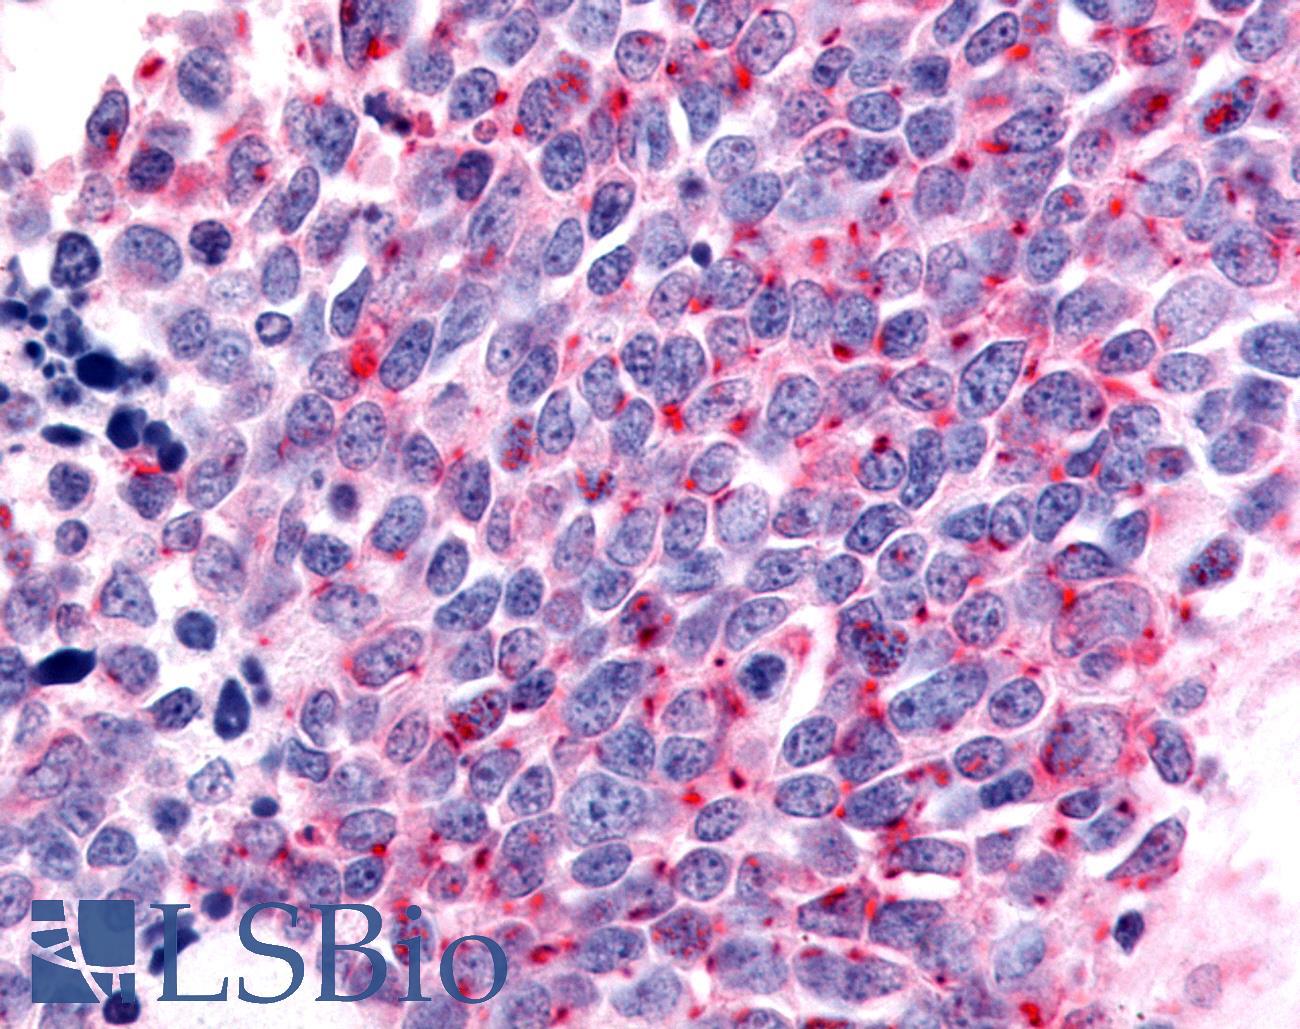 OR6K3 Antibody - Lung small cell carcinoma